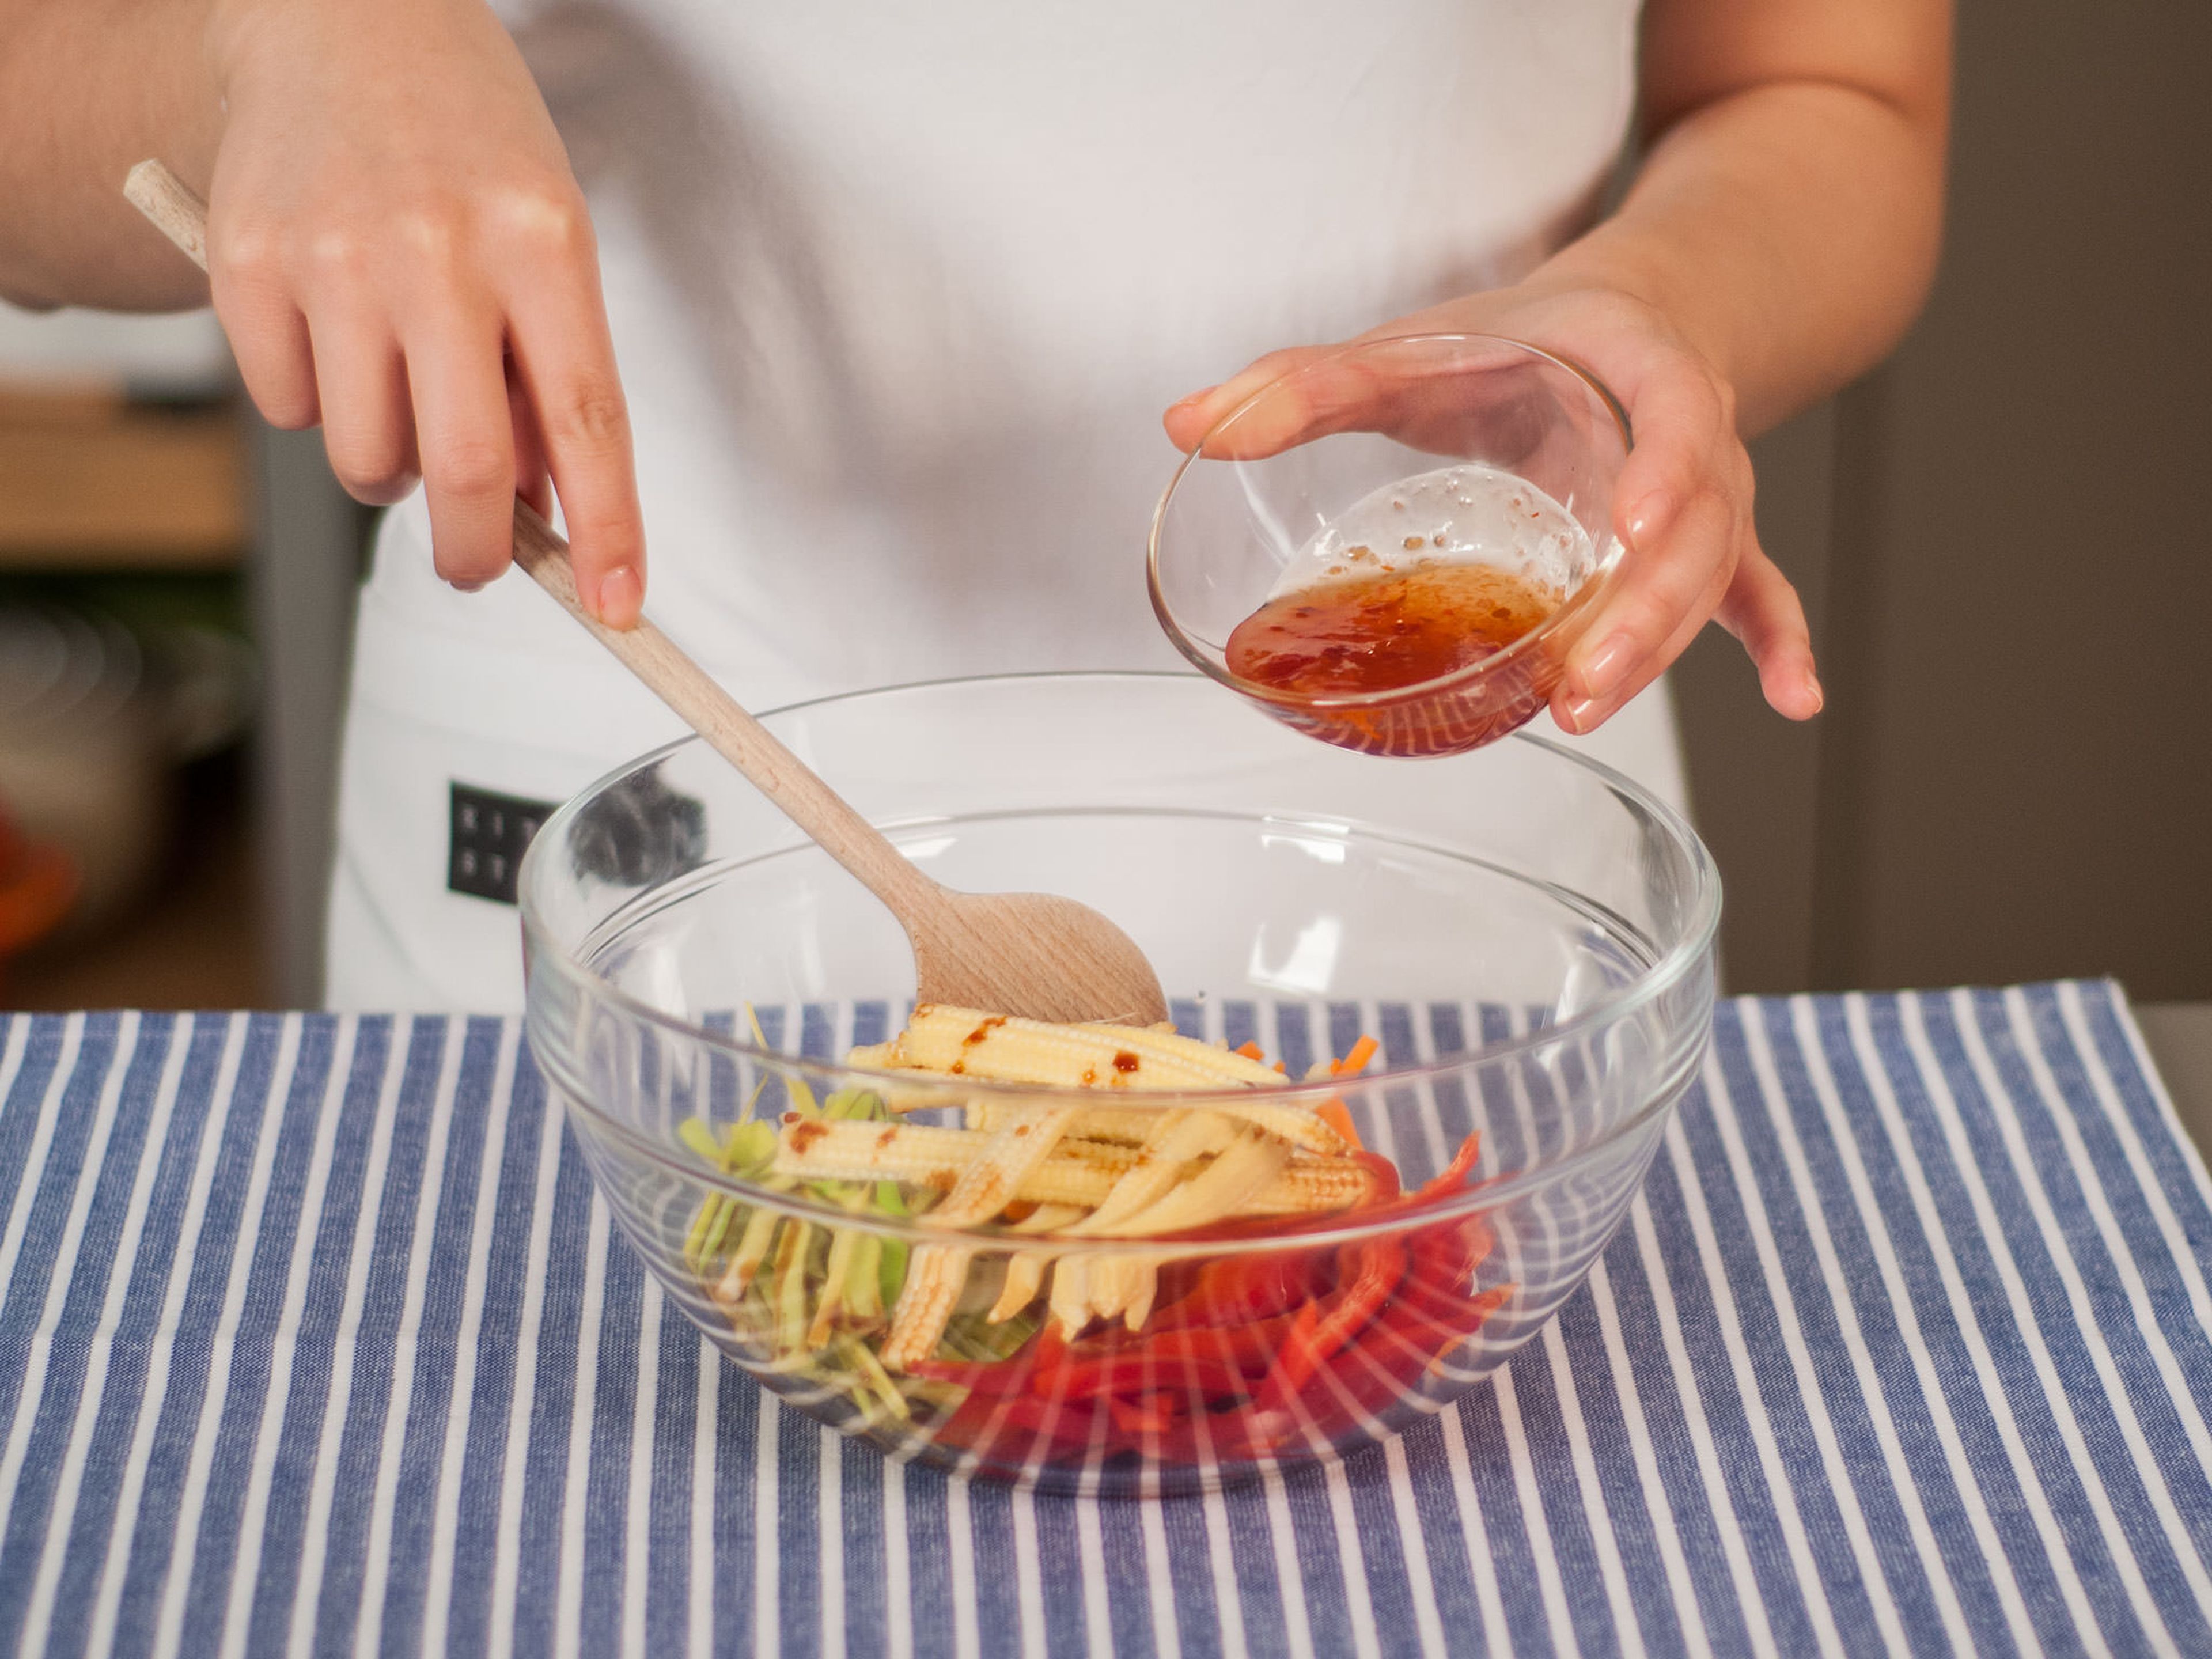 In a large bowl, mix sliced carrots, leek, bell pepper, and baby corn with sweet chili sauce and soy sauce.